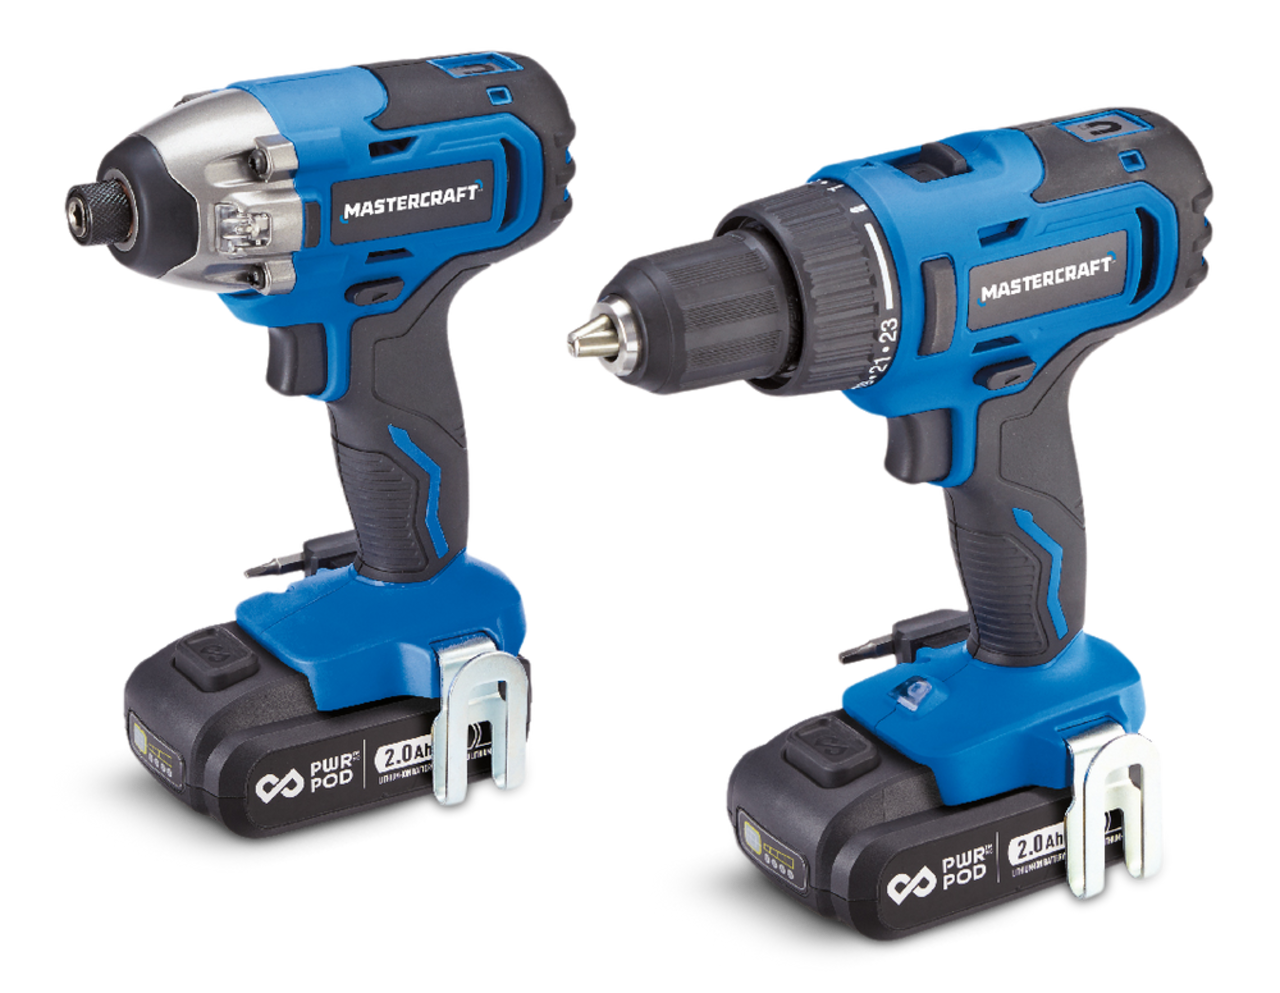 https://media-www.canadiantire.ca/product/fixing/tools/portable-power-tools/0547546/mastercraft-20v-brushed-1-2-drill-1-4-impact-driver-kit-33d113de-7132-4e9b-a1b6-435fdd791e50.png?imdensity=1&imwidth=640&impolicy=mZoom